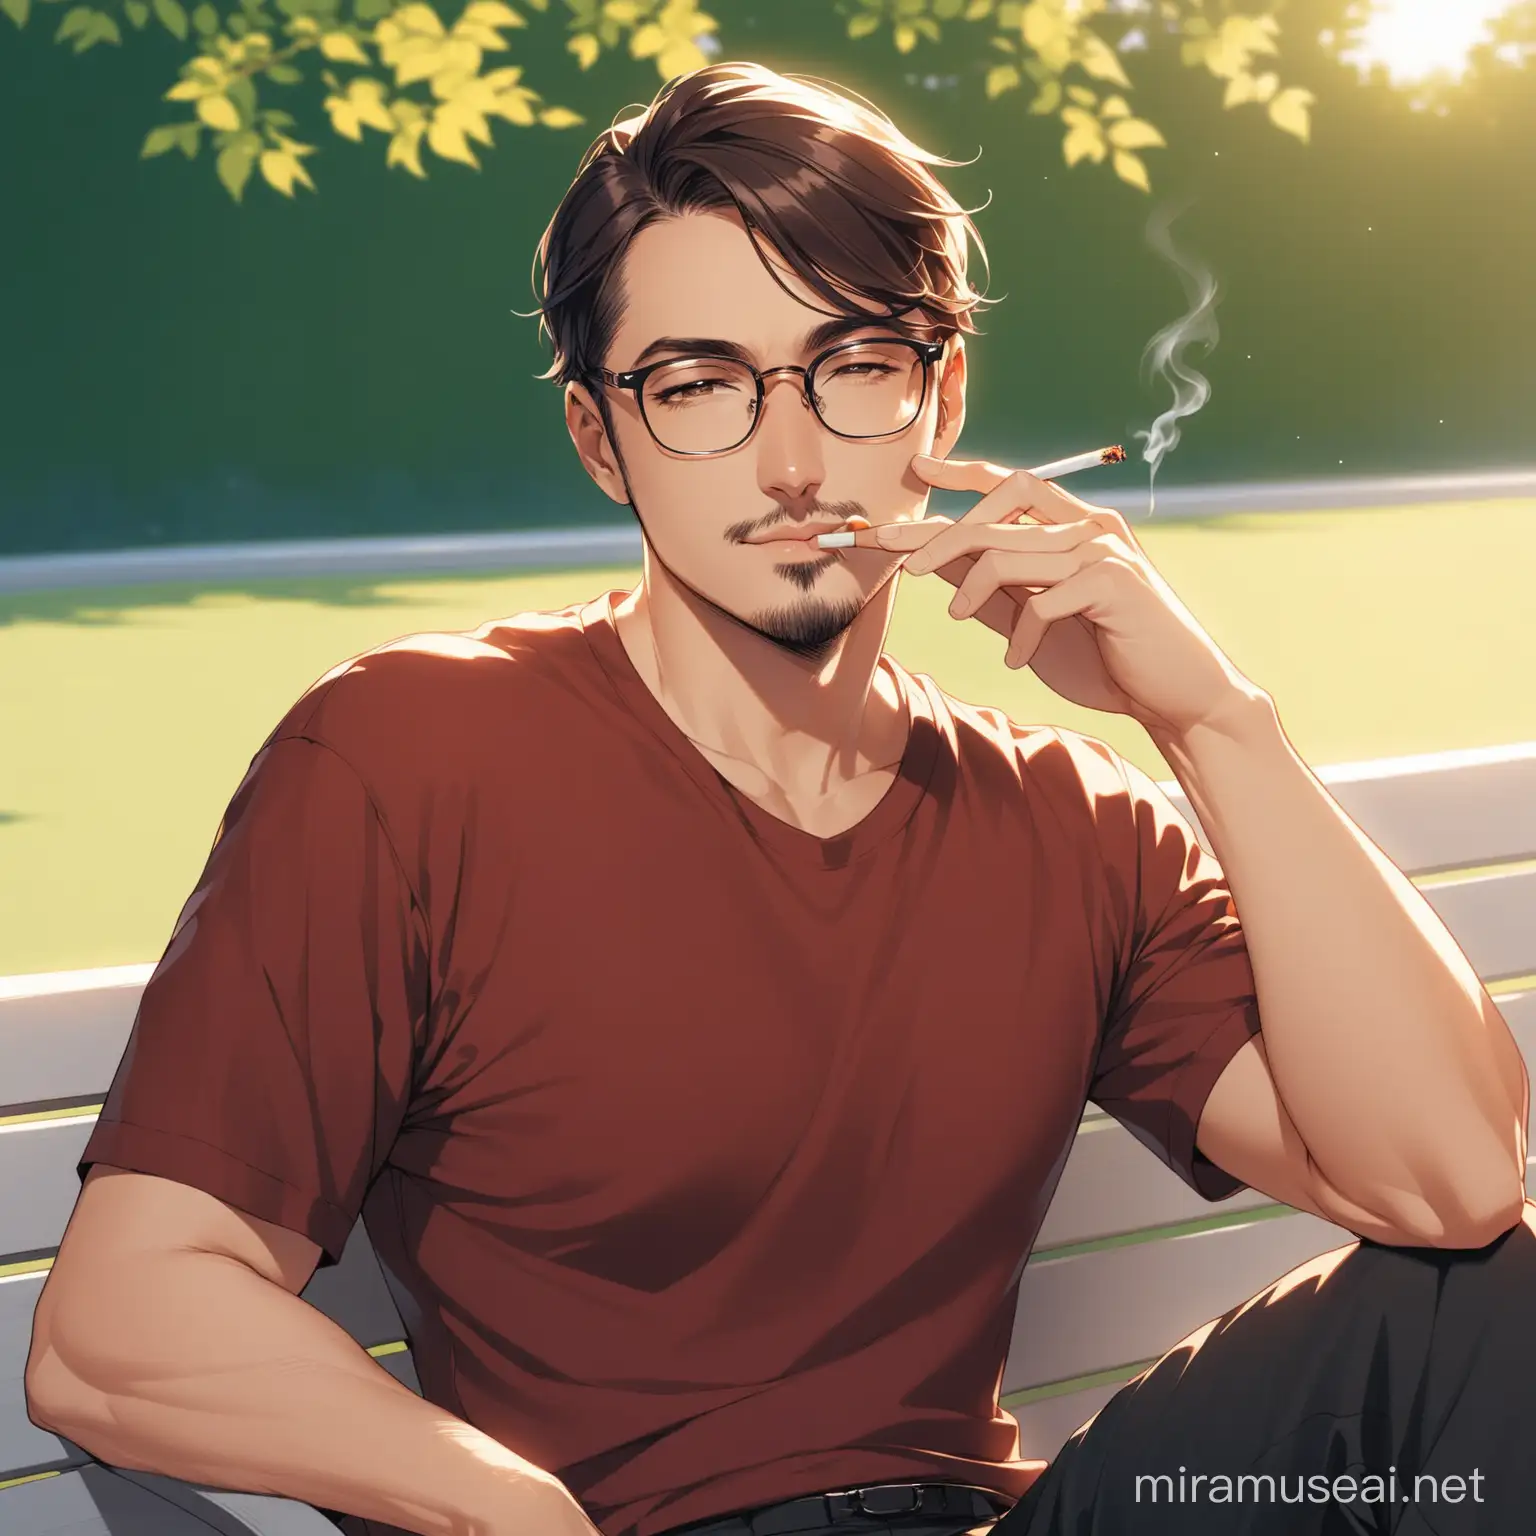 Relaxed Man Smoking a Cigarette